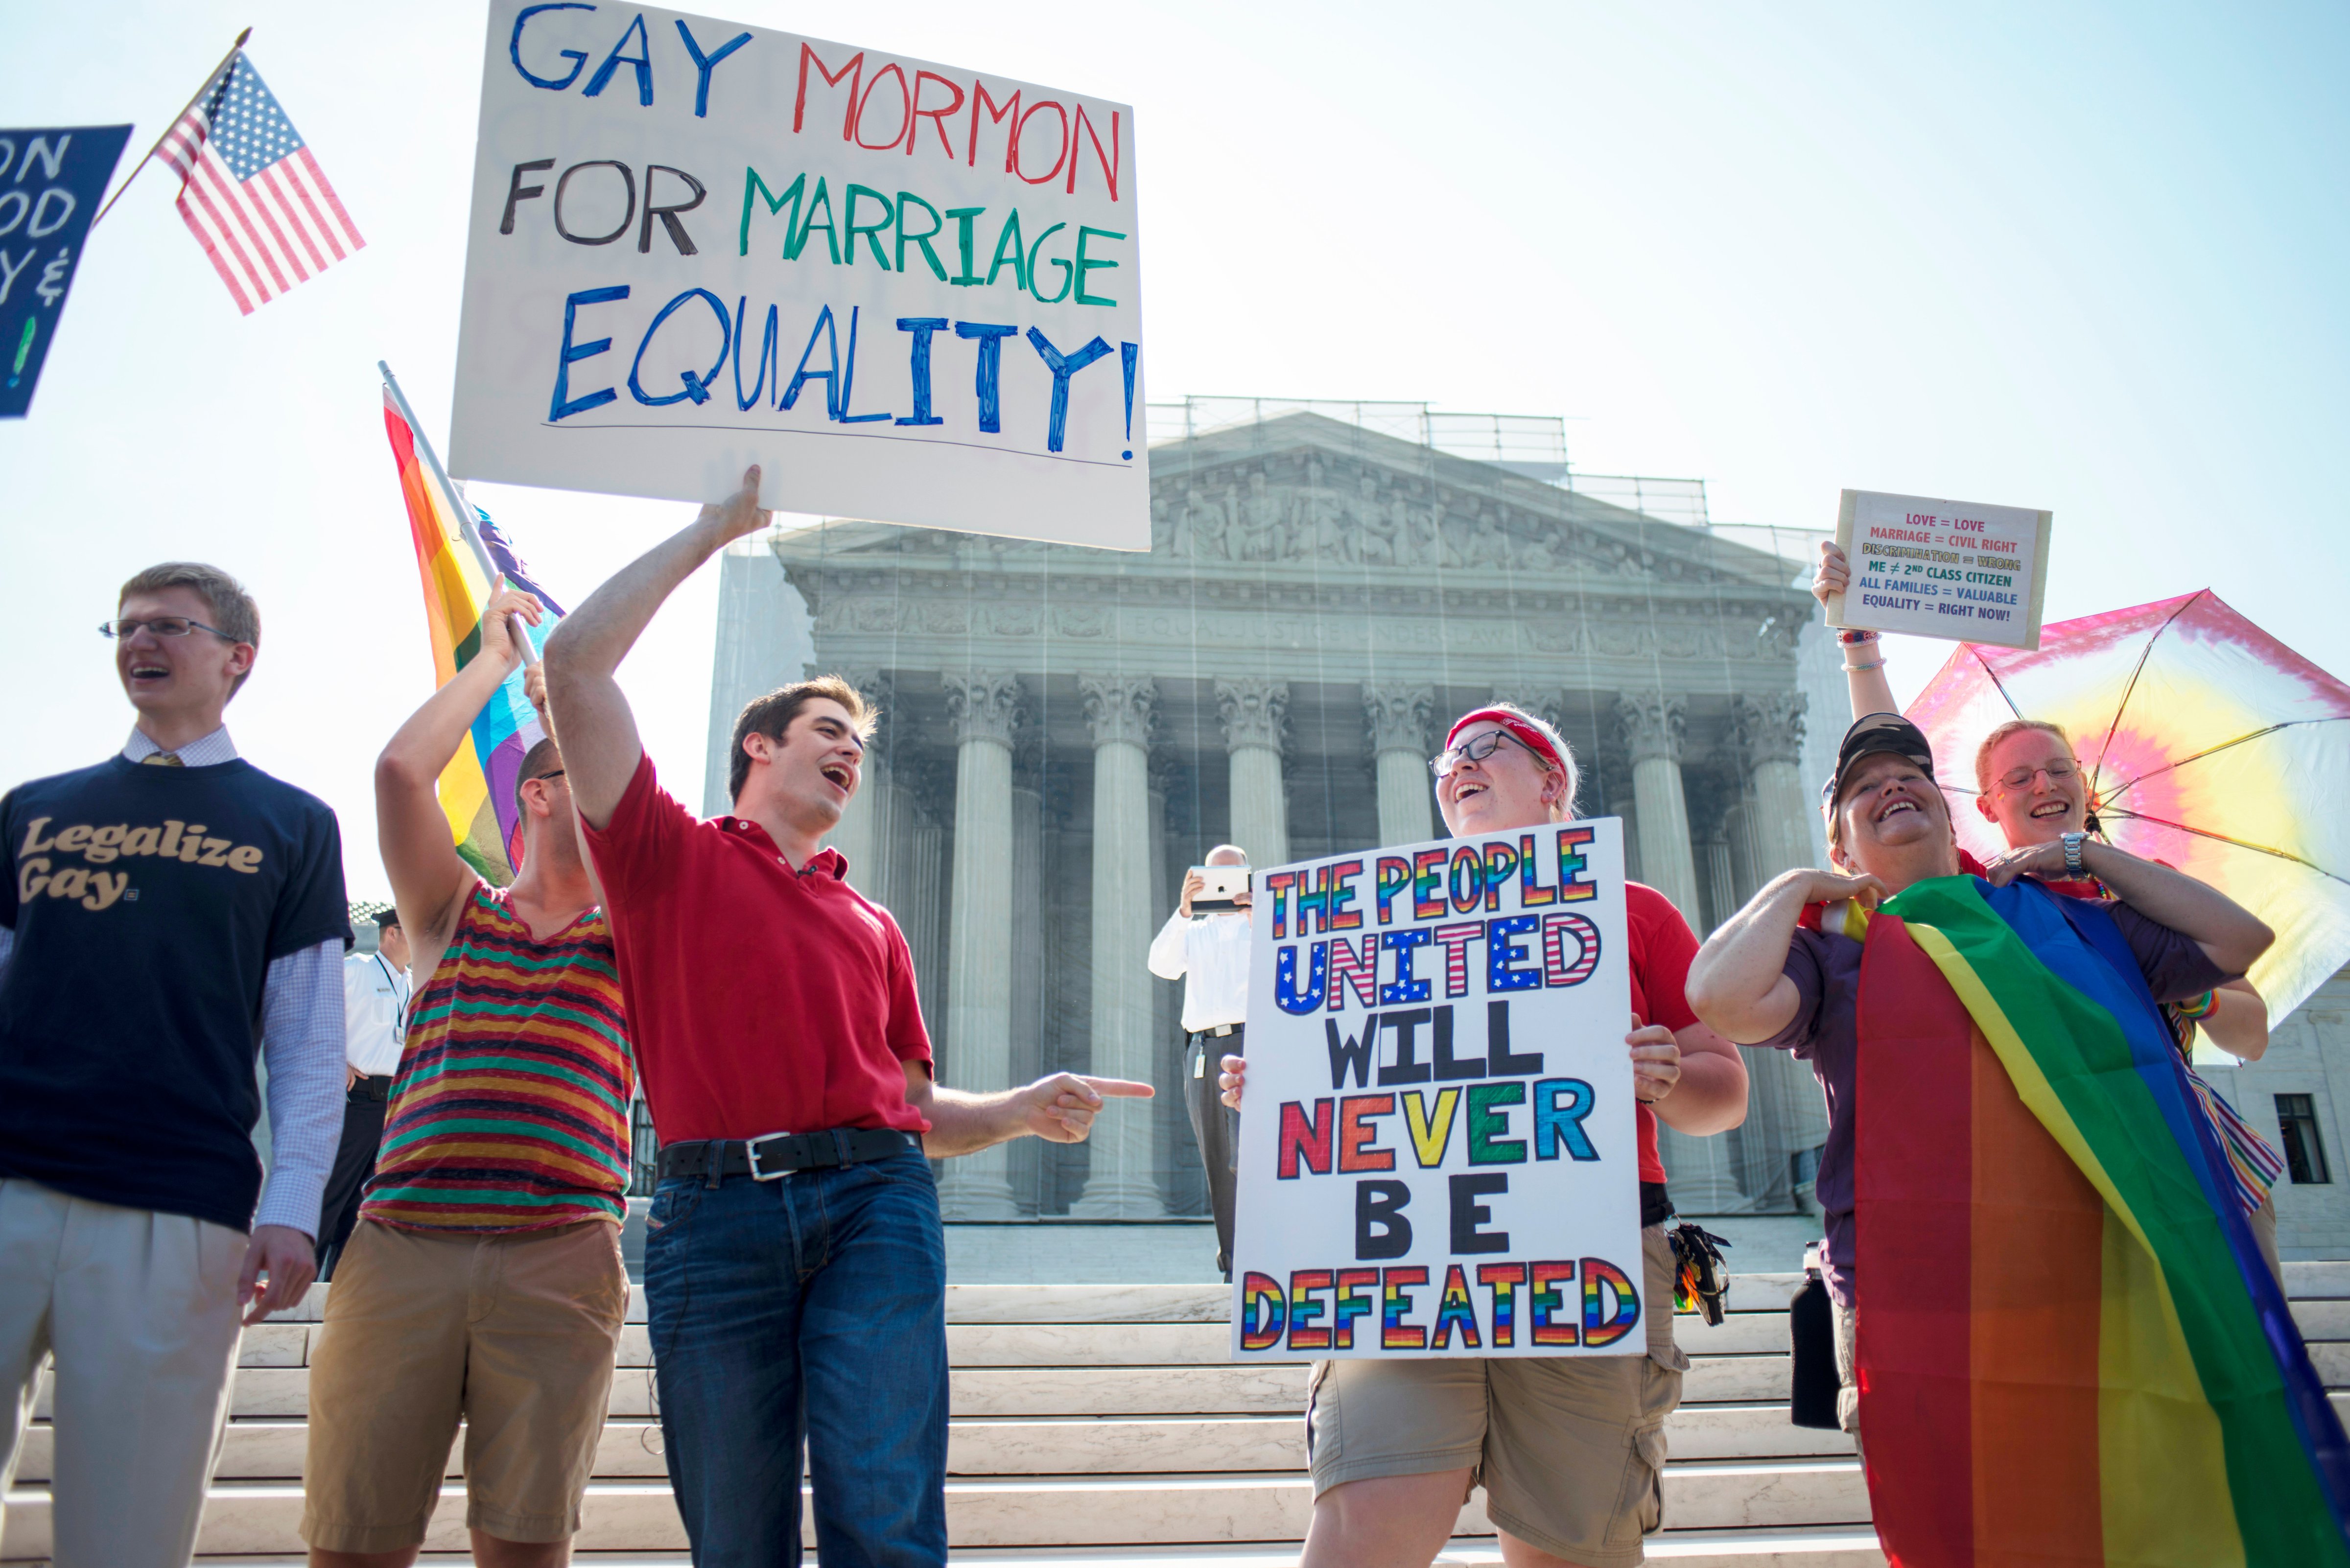 Gay rights supporters cheer and chant outside of the United States Supreme Court waiting for the ruling  on Proposition 8 and the Defense of Marriage Act in Washington, D.C. on June 26, 2013. (Marvin Joseph / The Washington Post / Getty Images)